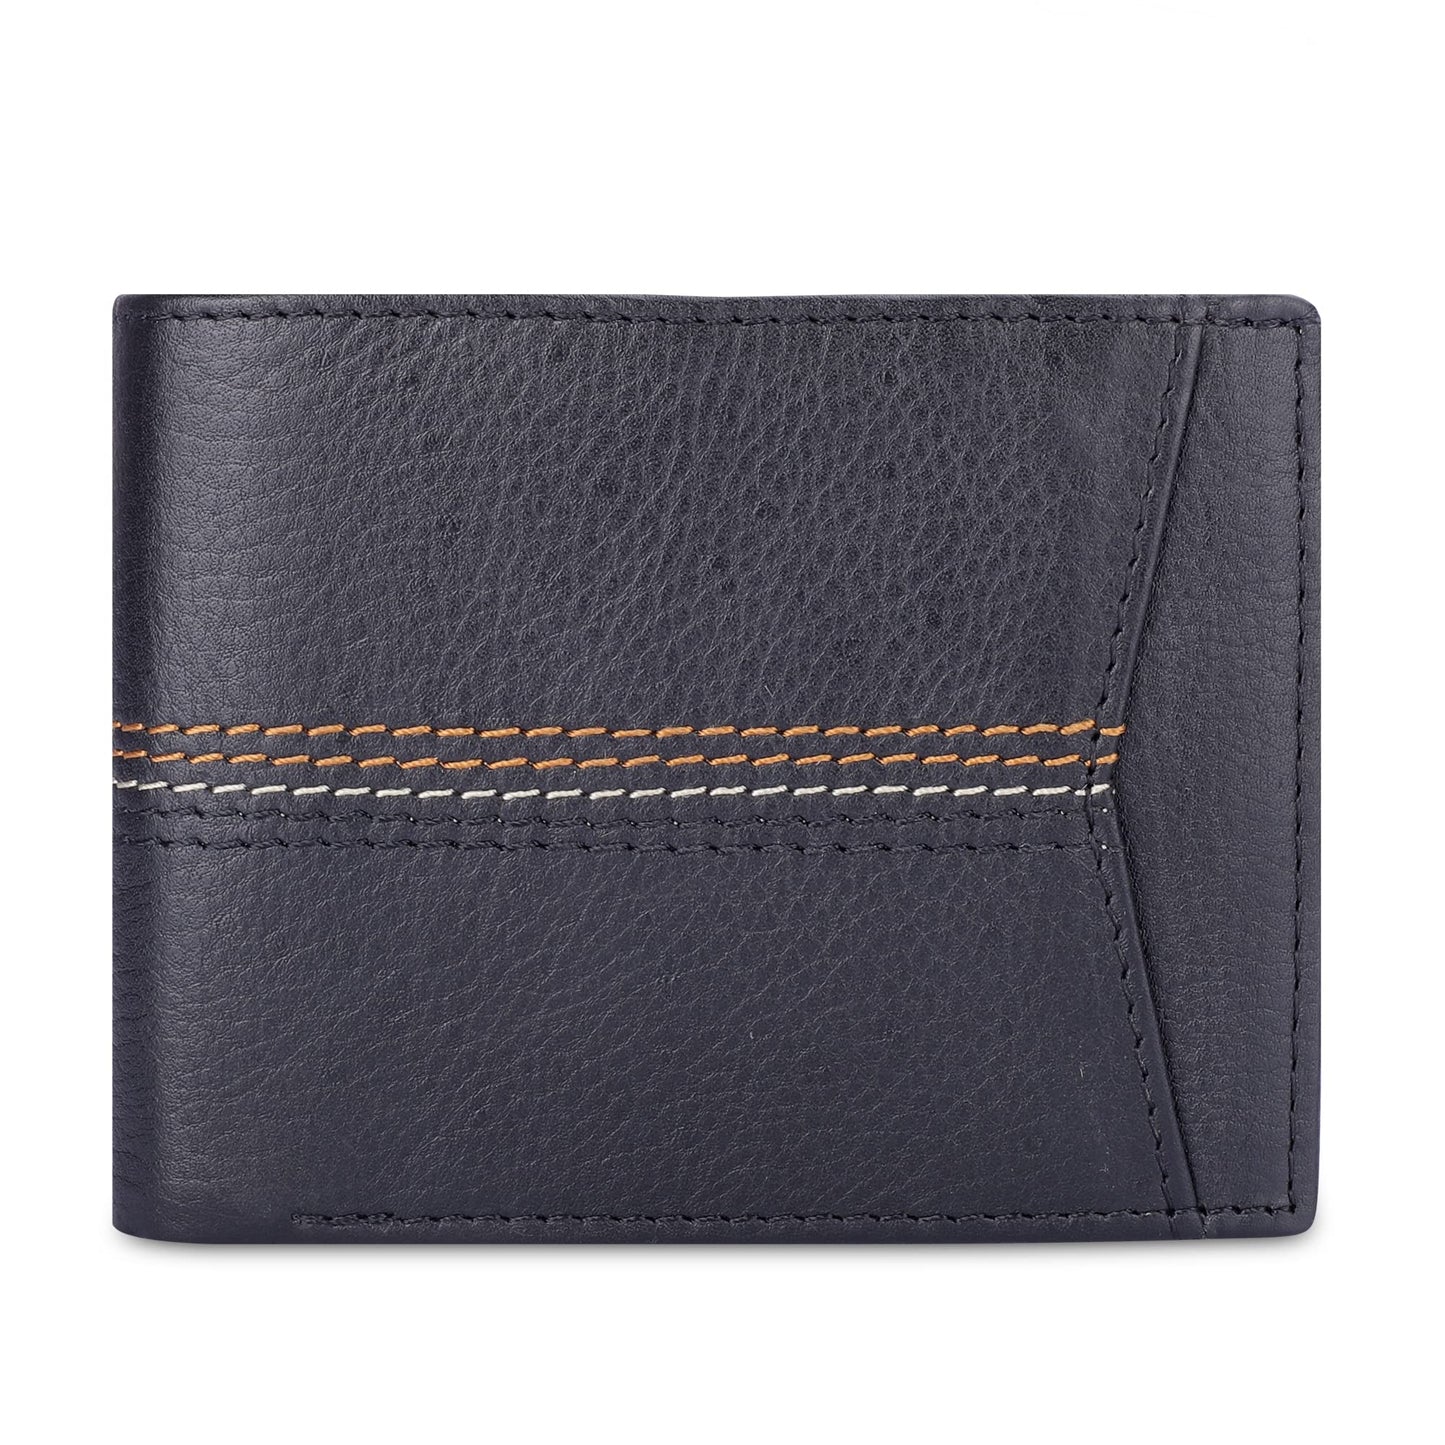 THE CLOWNFISH RFID Protected Genuine Leather Bi-Fold Wallet for Men with Multiple Card Slots & Coin Pocket (Black)